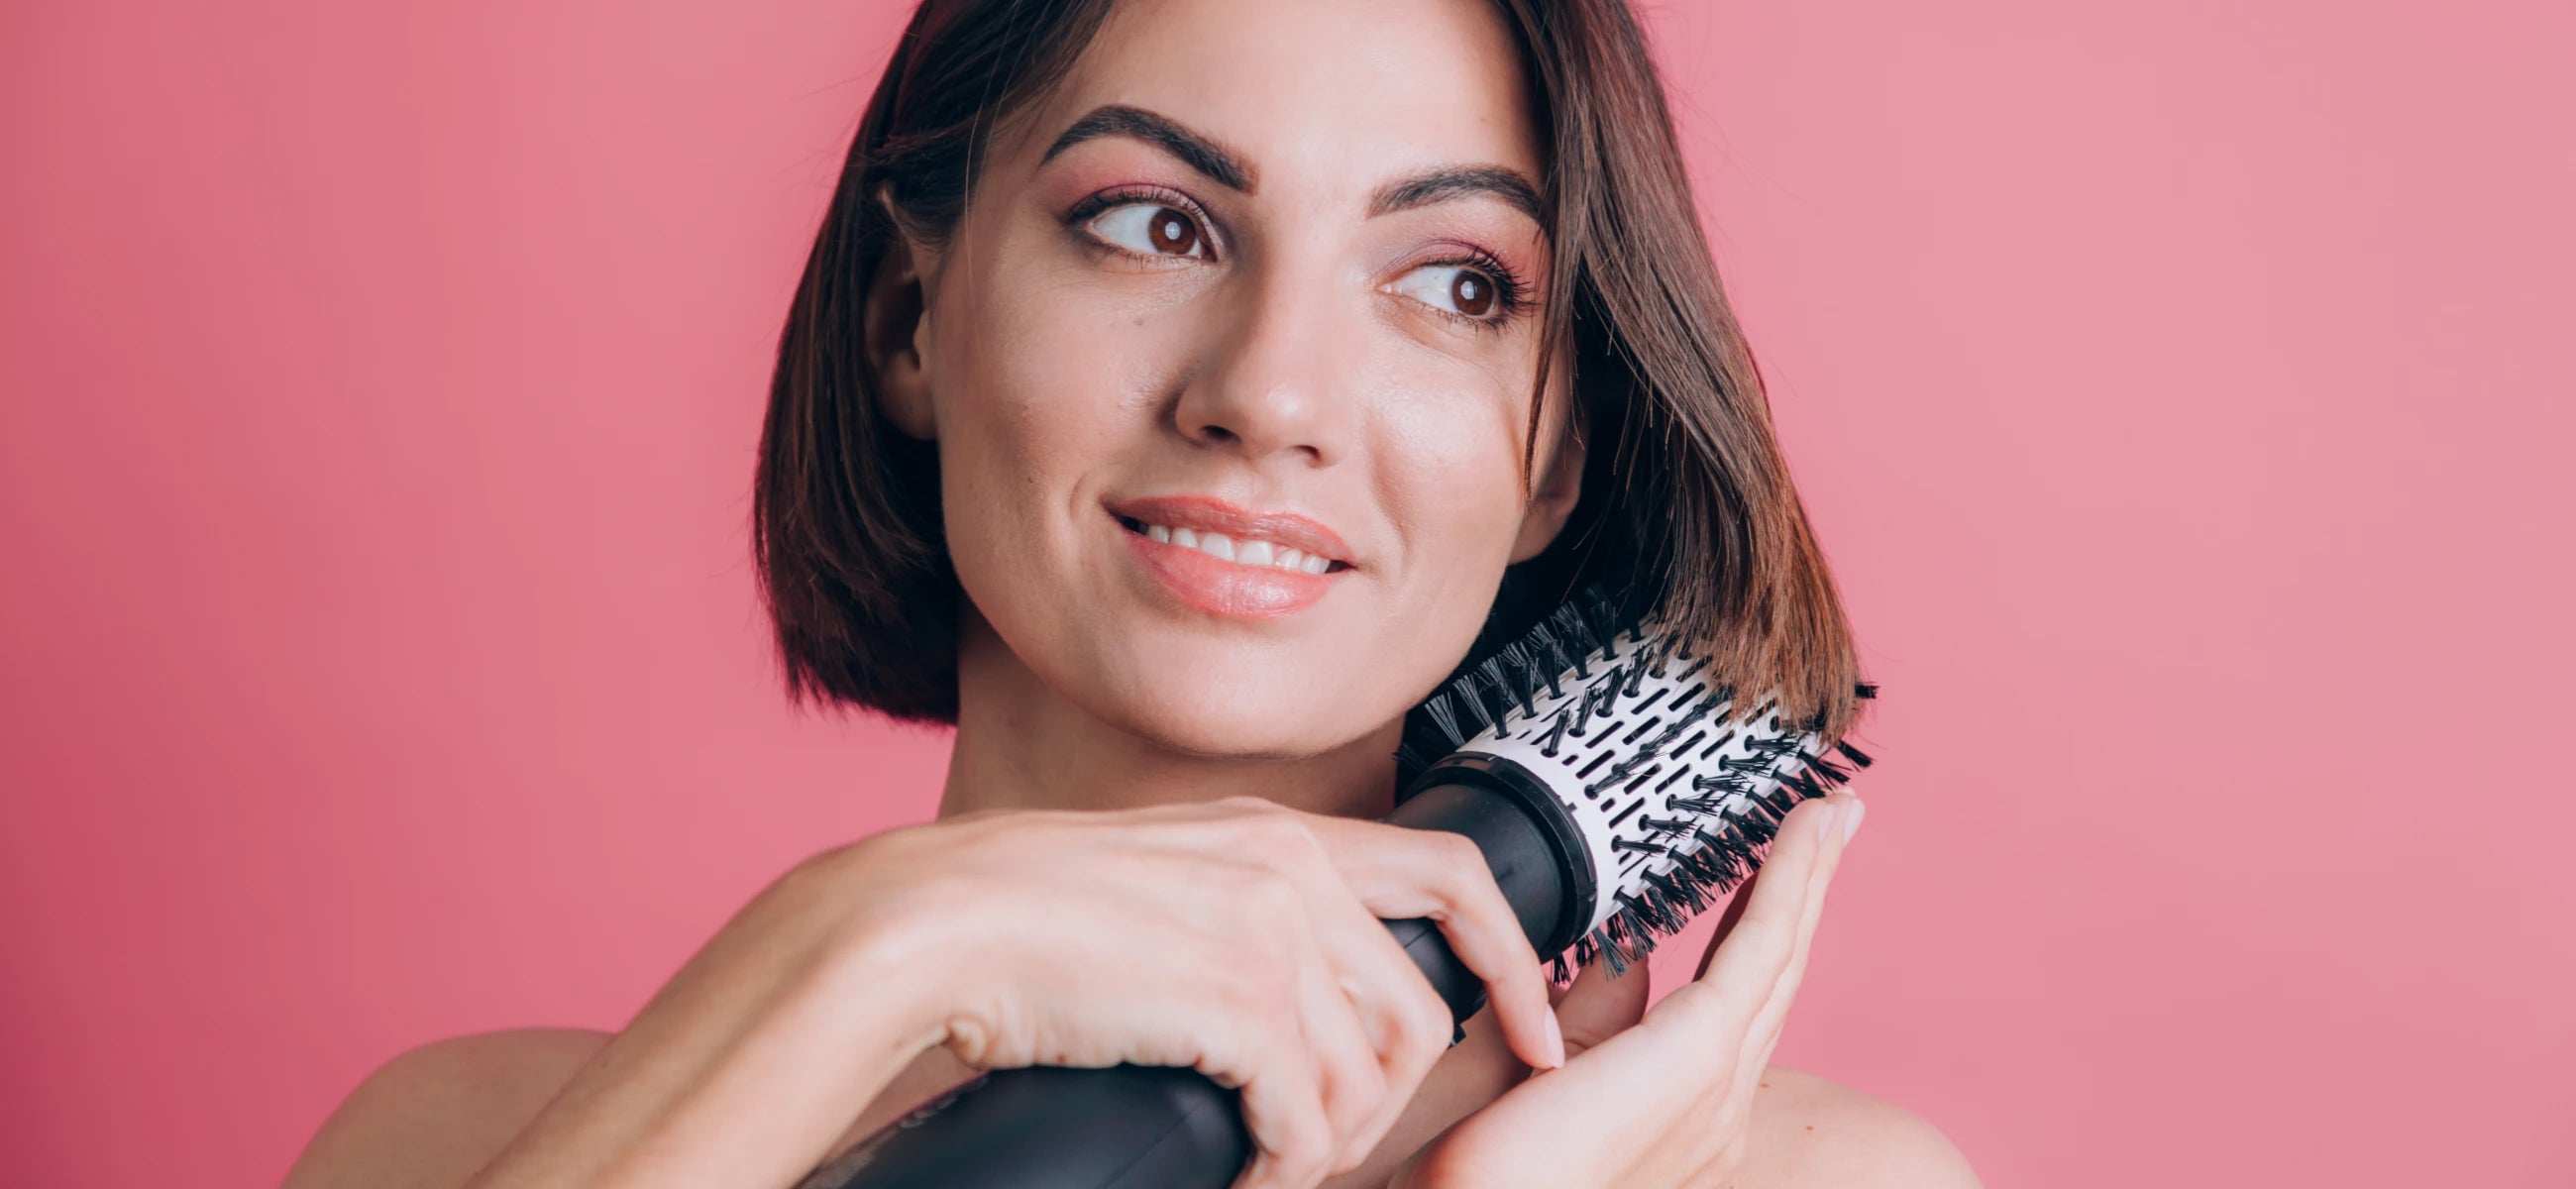 3 best brushes for blow drying your hair, recommended by experts 